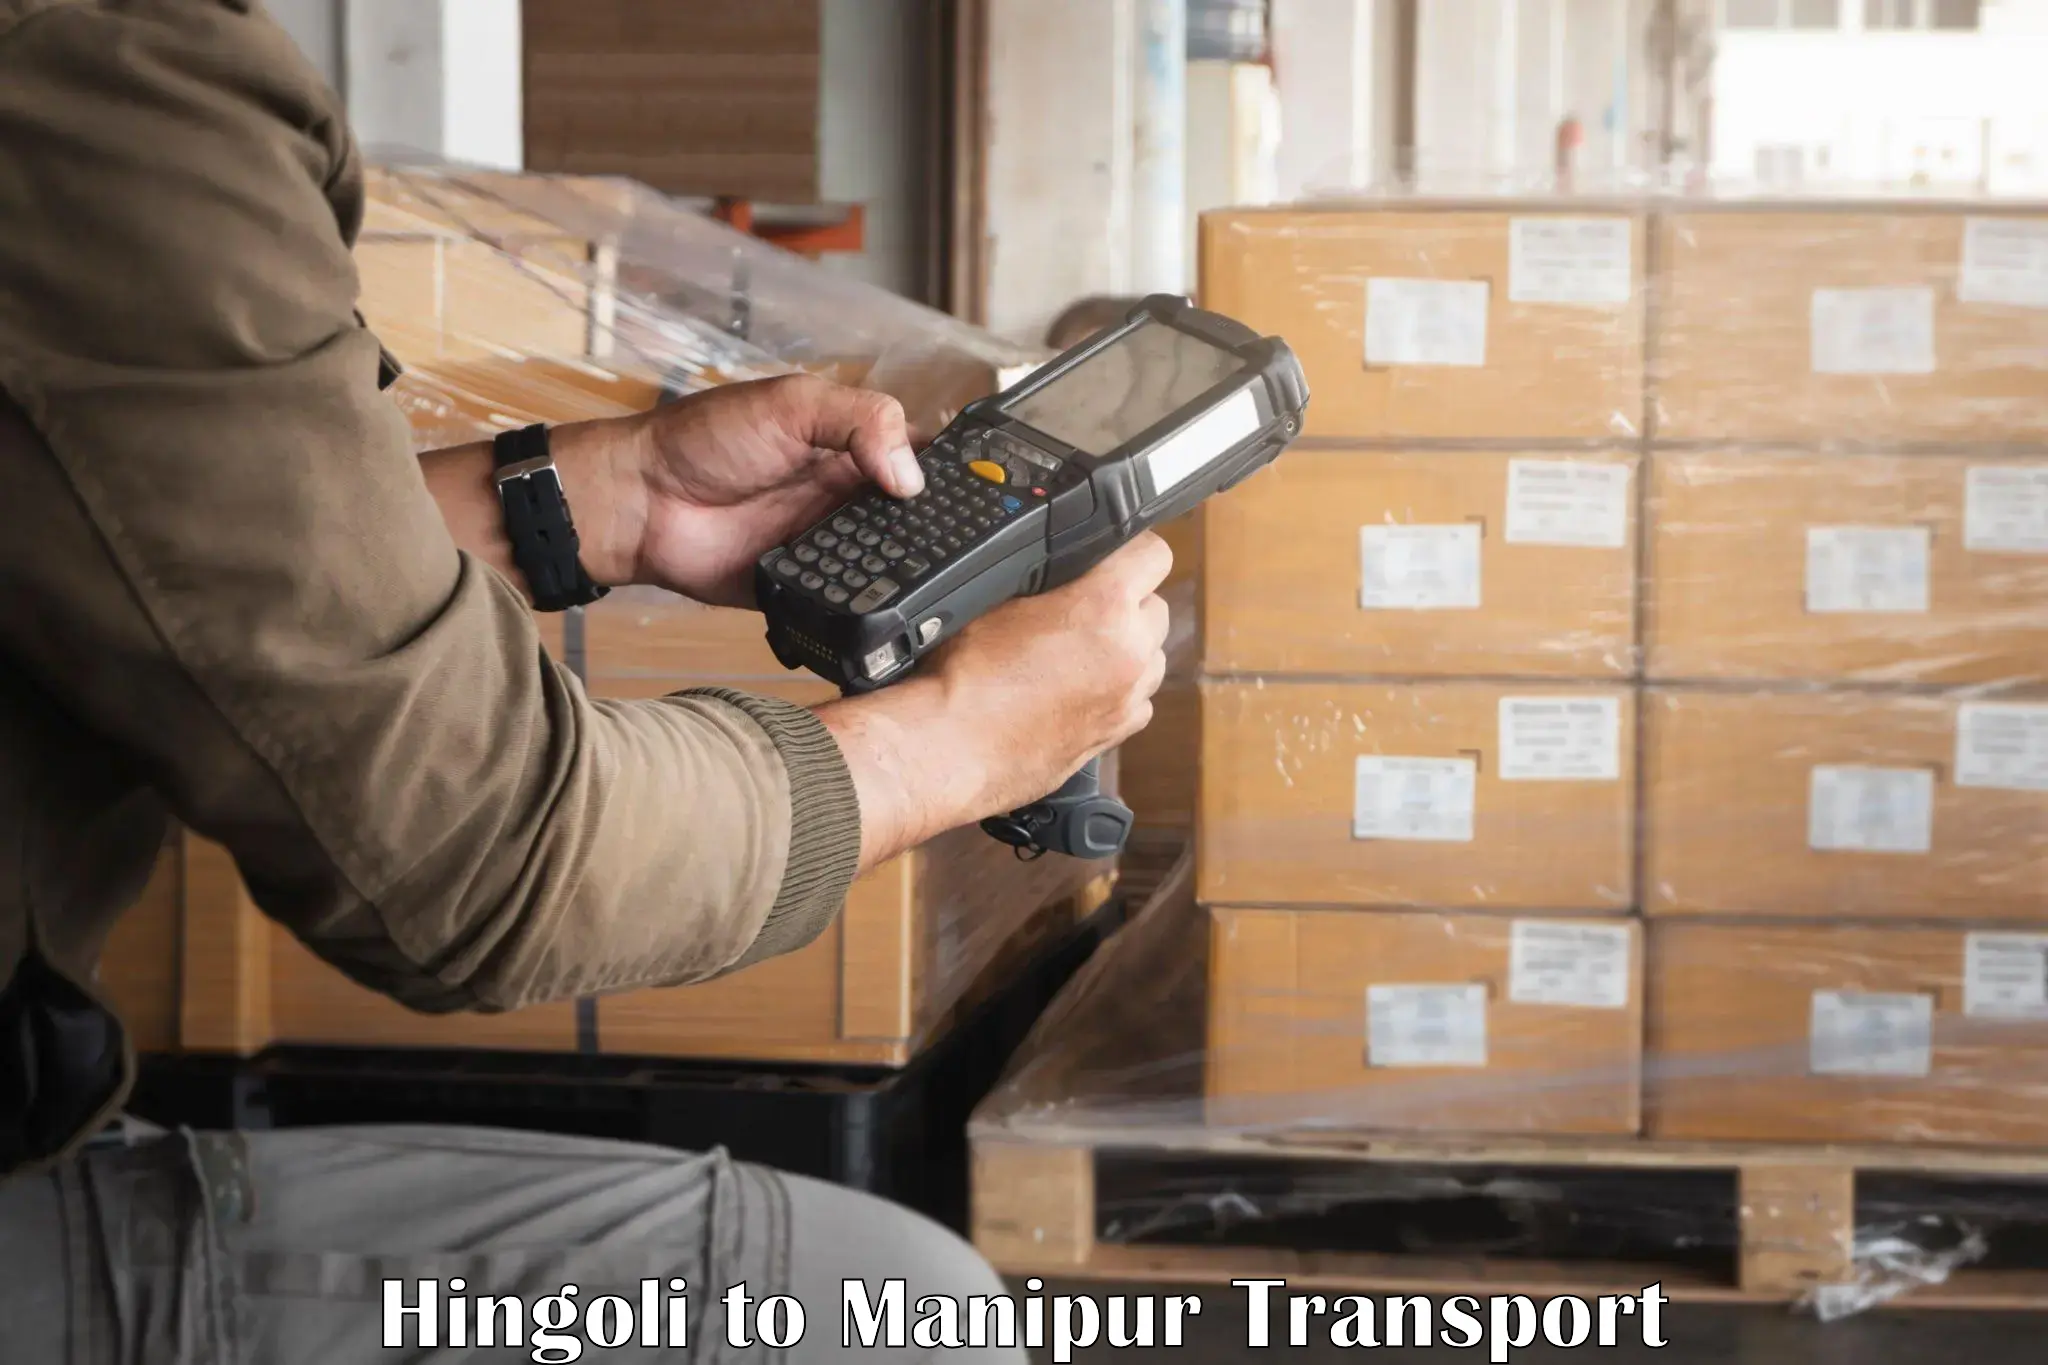 Delivery service Hingoli to Manipur